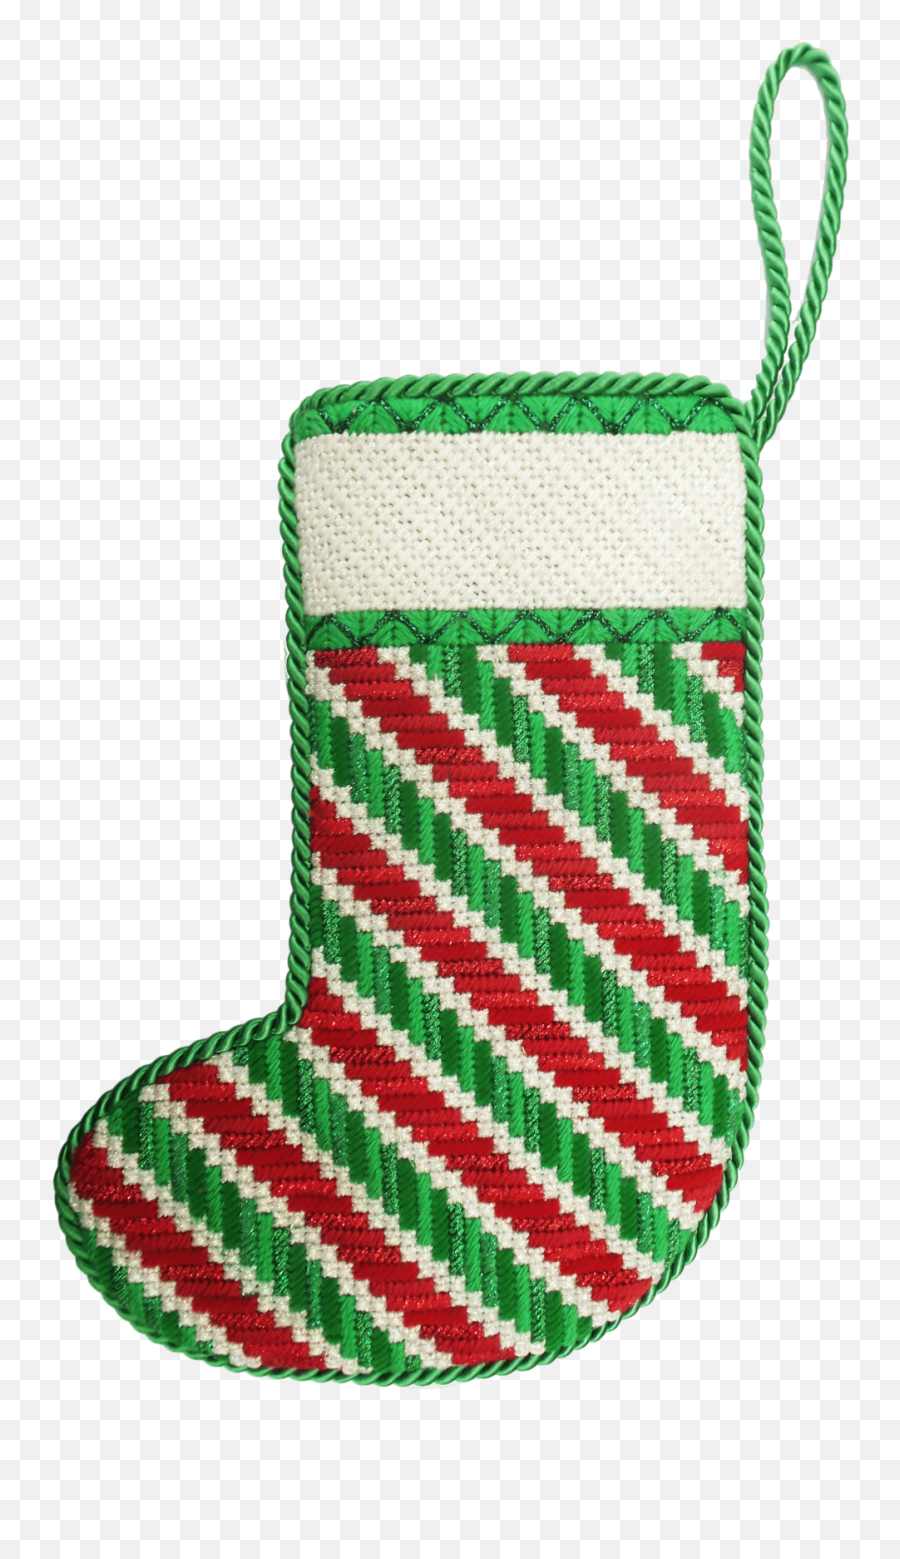 Download Christmas Stockings Png Image With No - Christmas Stocking,Christmas Stockings Png